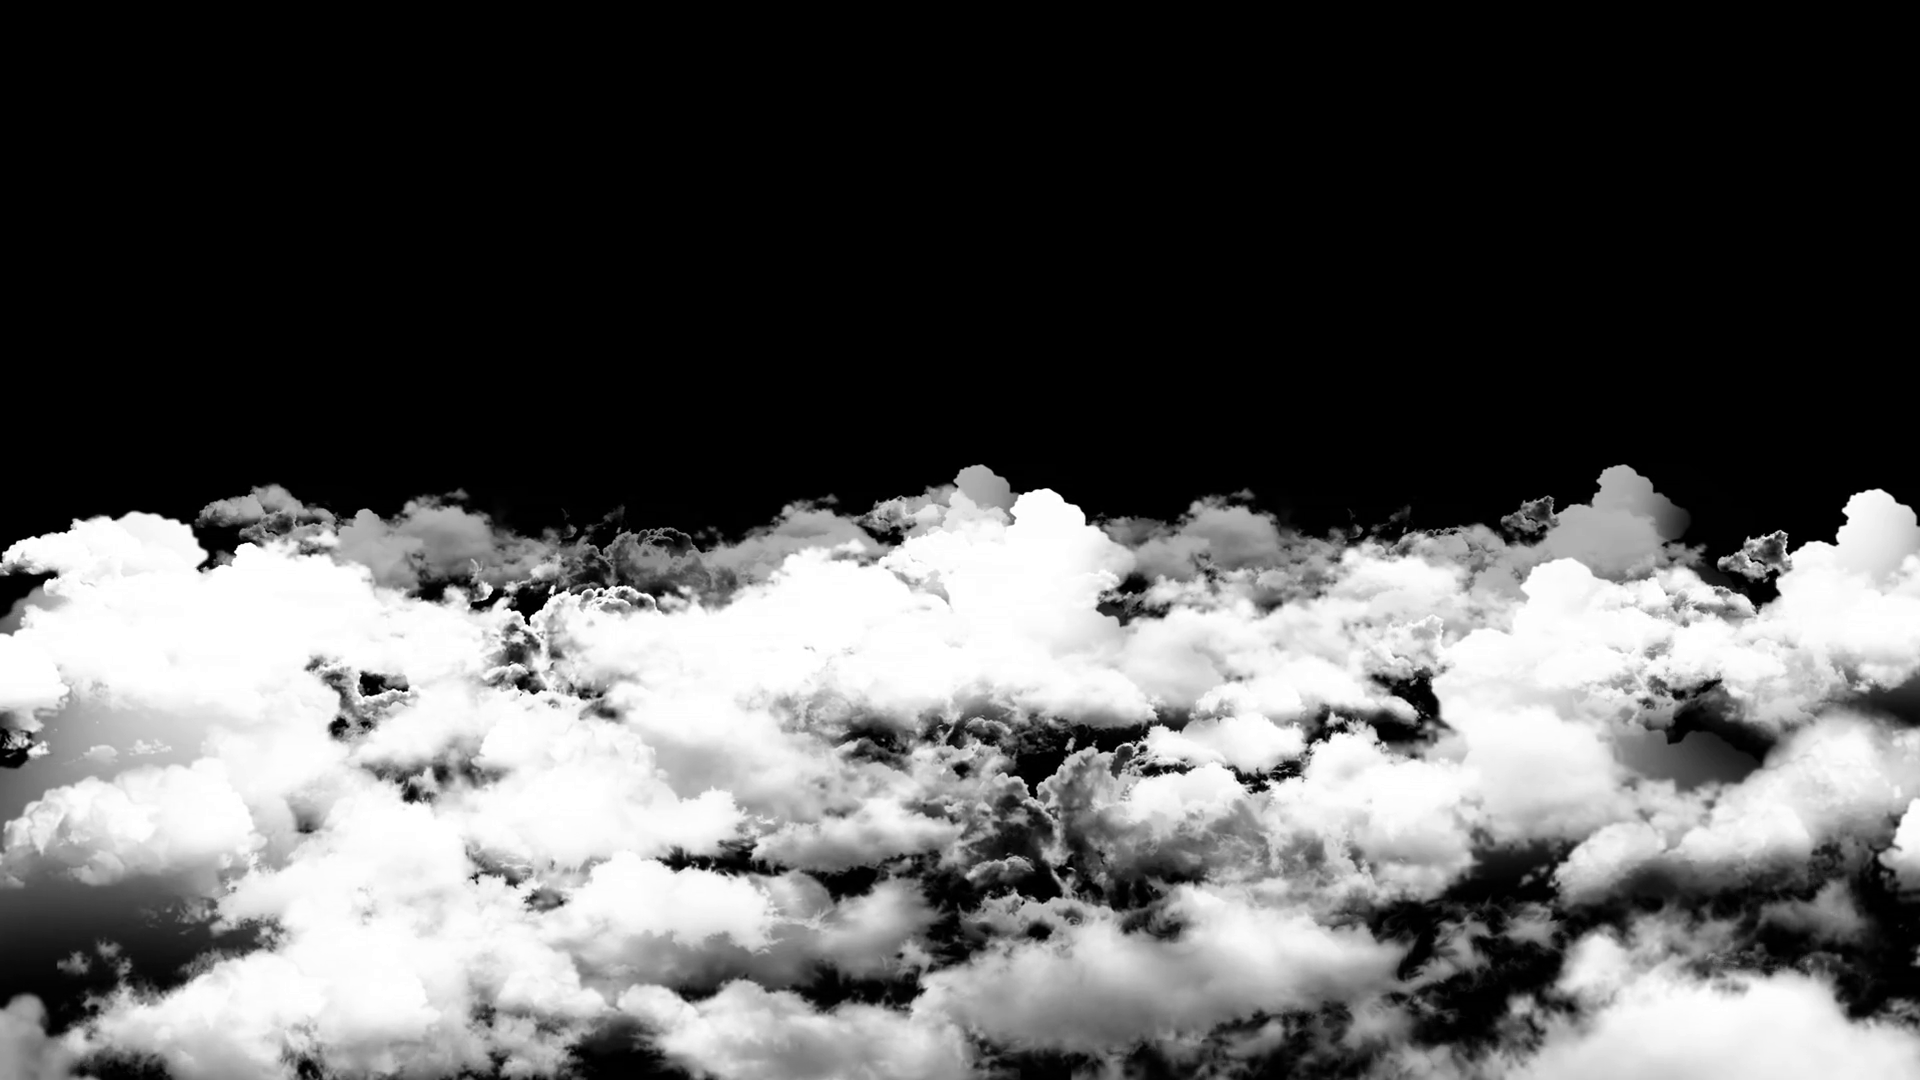 White clouds against a black background.